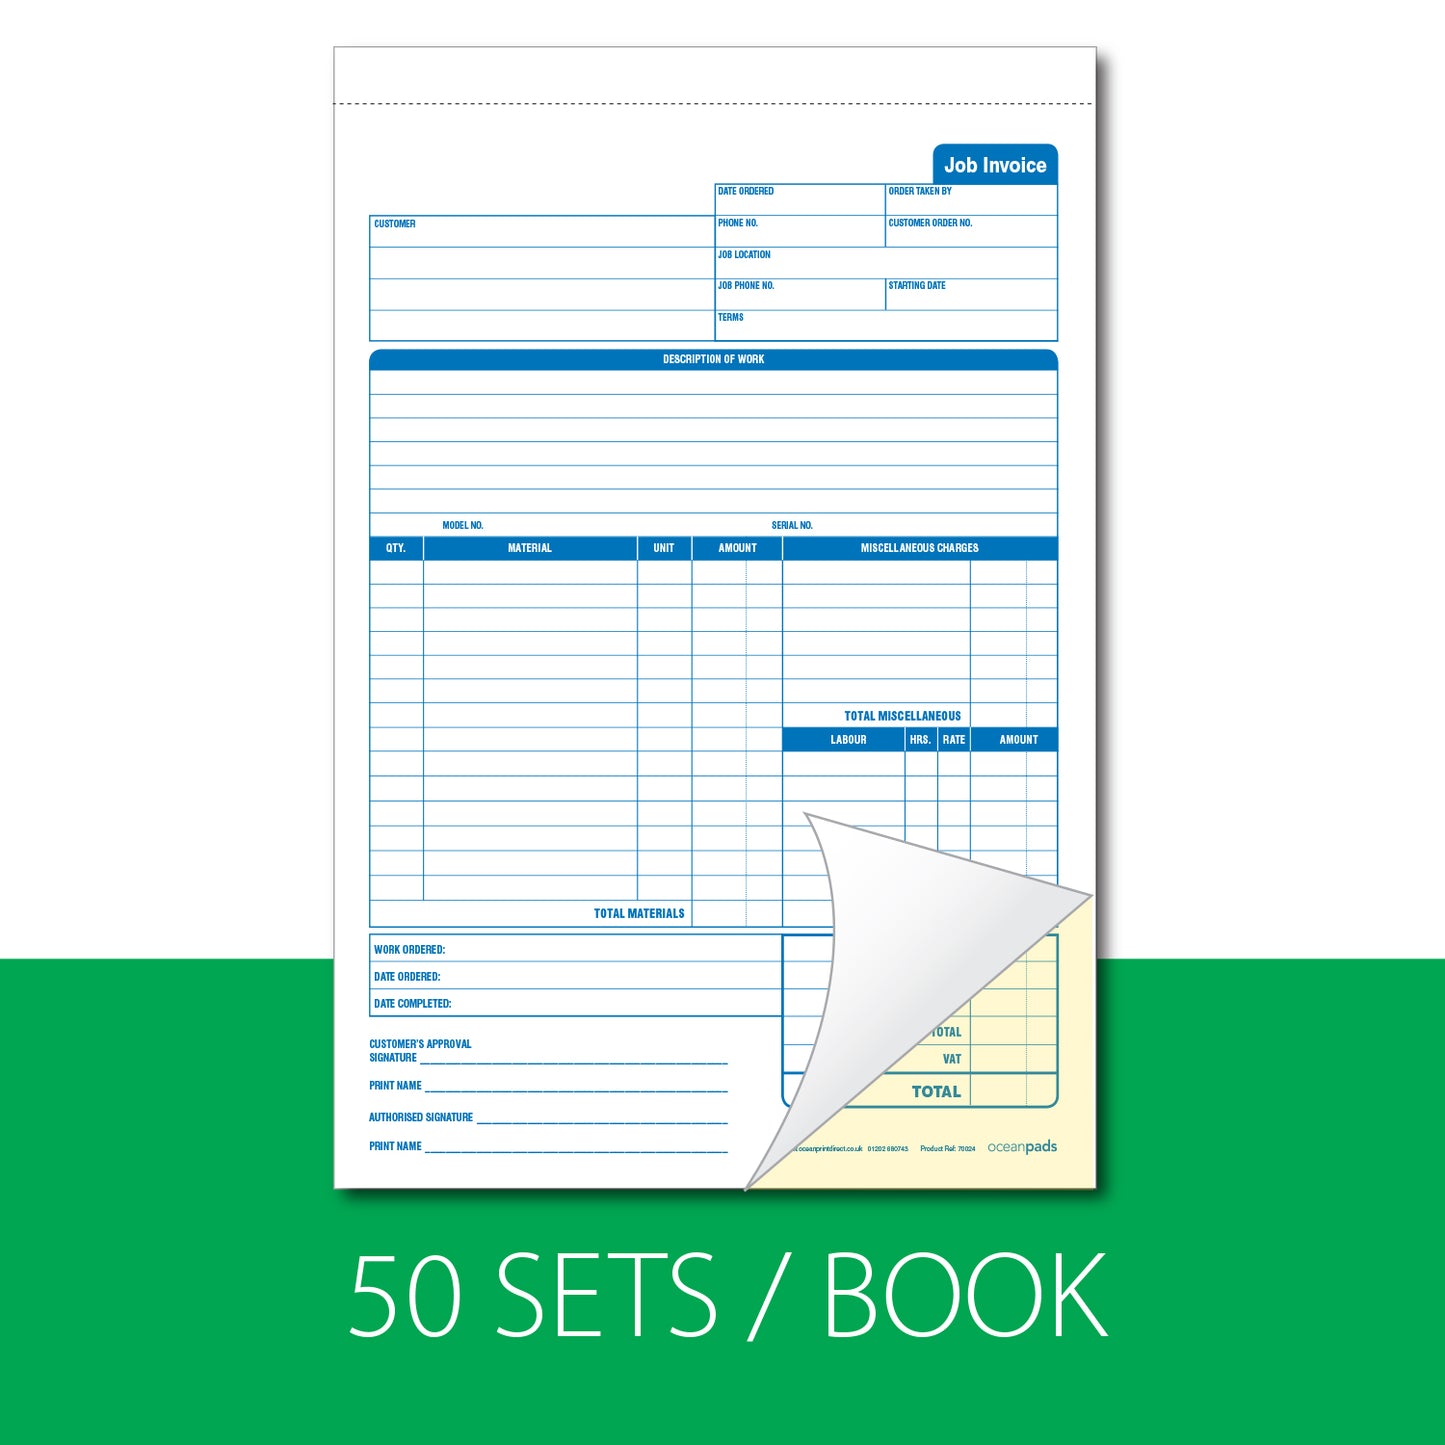 Job Invoice Book for Service and Repair Businesses, A4, Duplicate